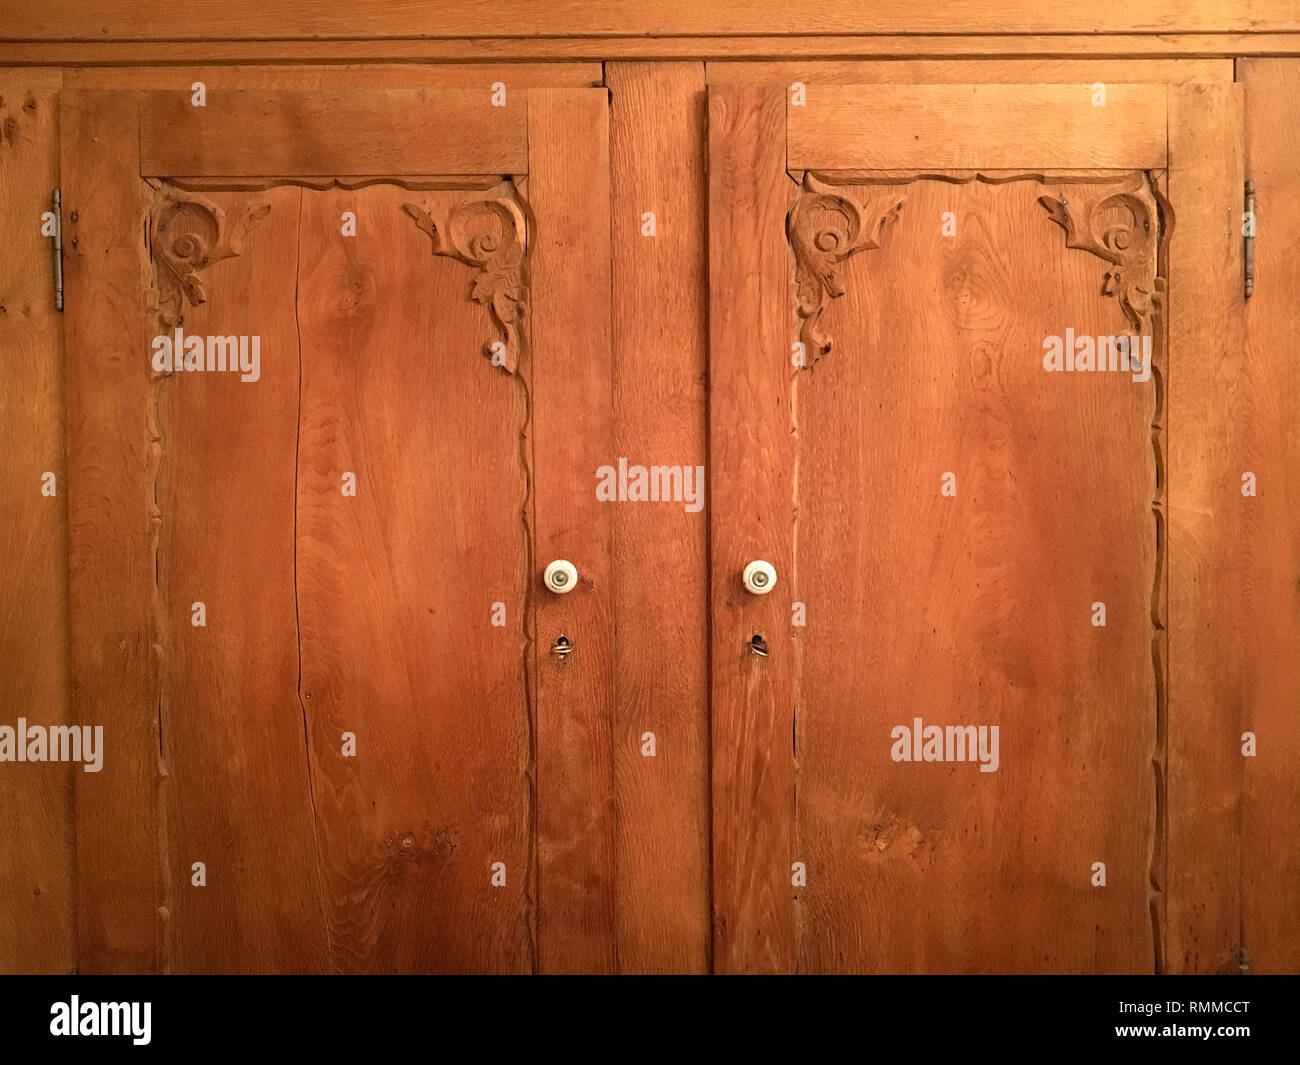 Front of wooden cabinet doors with keys and knobs. Vintage furniture. Stock Photo